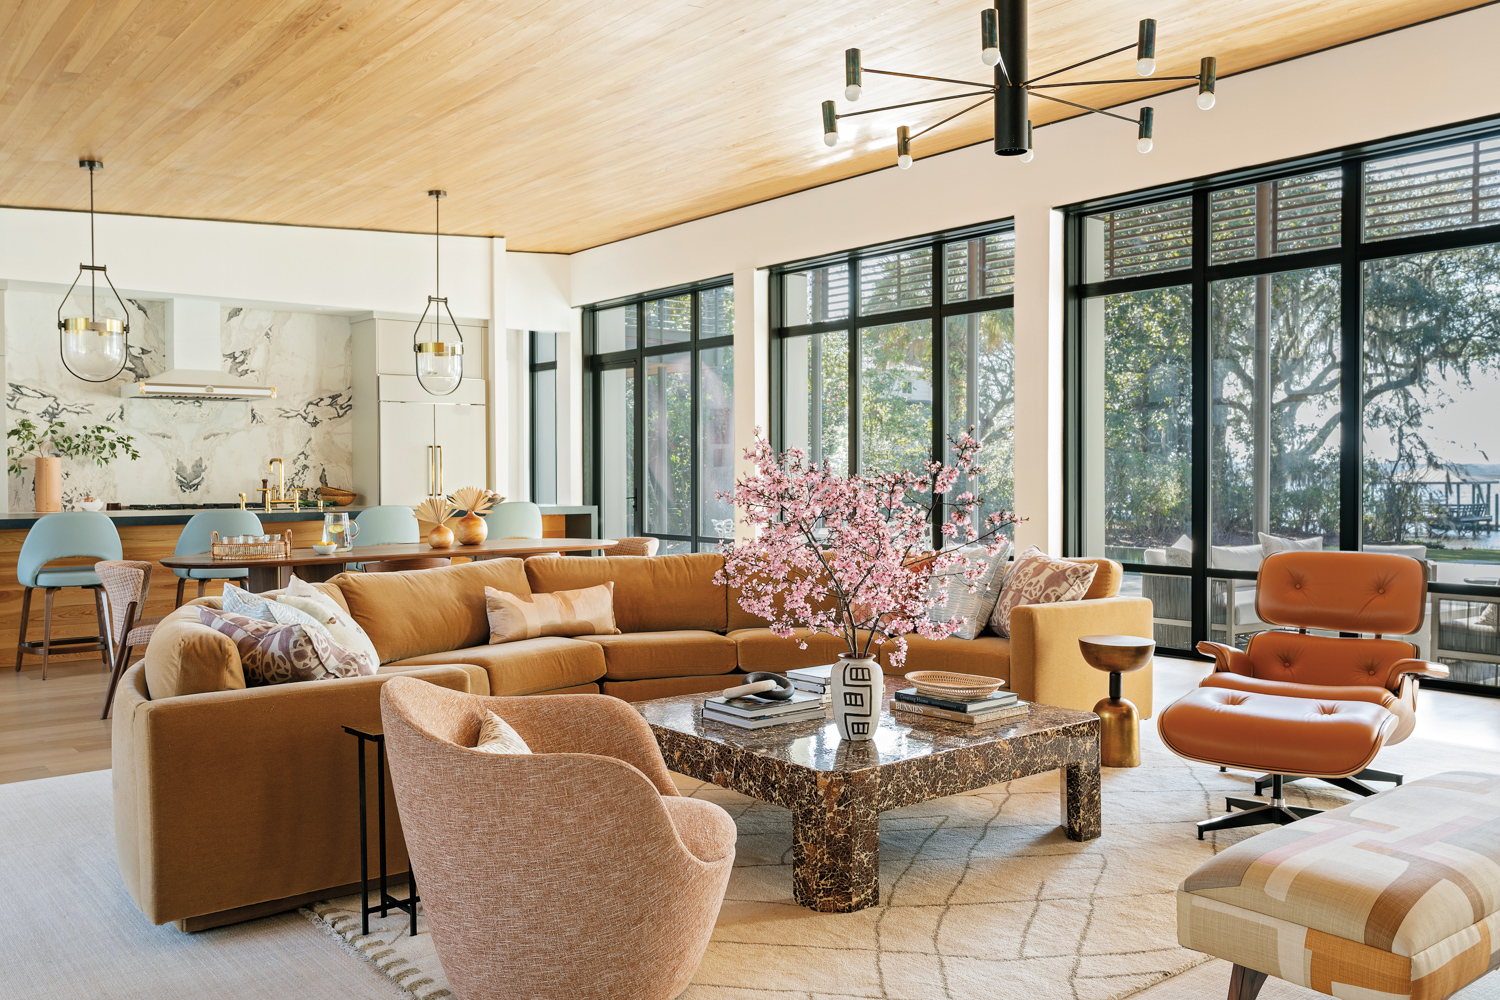 This Modernist Abode Embraces Charleston’s Lowcountry Dreamscapes